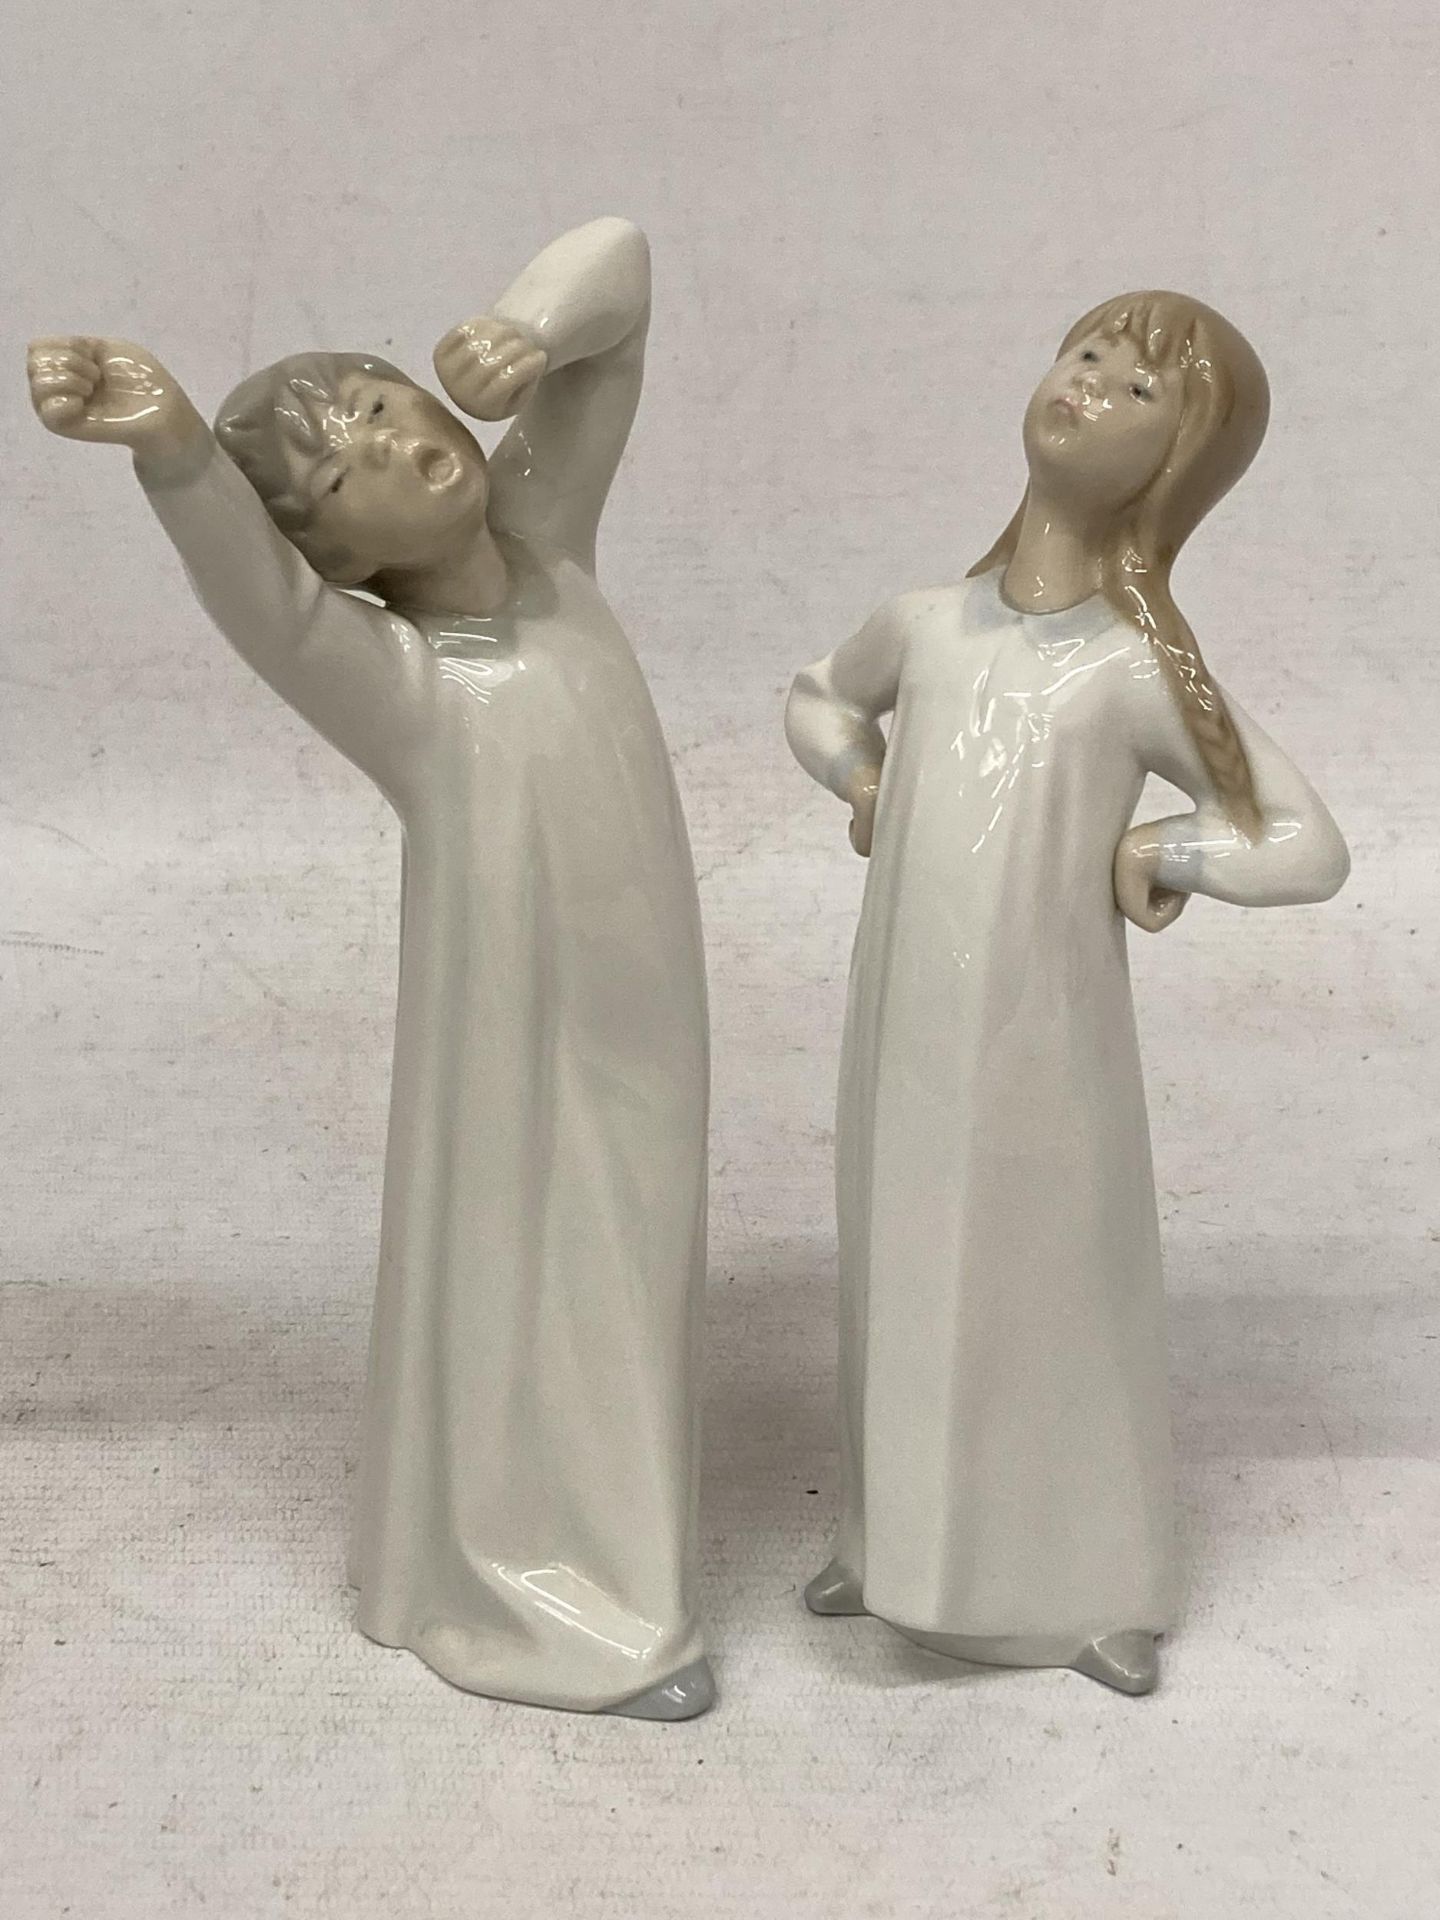 TWO FIGURES OF A GIRL AND BOY - ONE LLADRO, ONE NAO